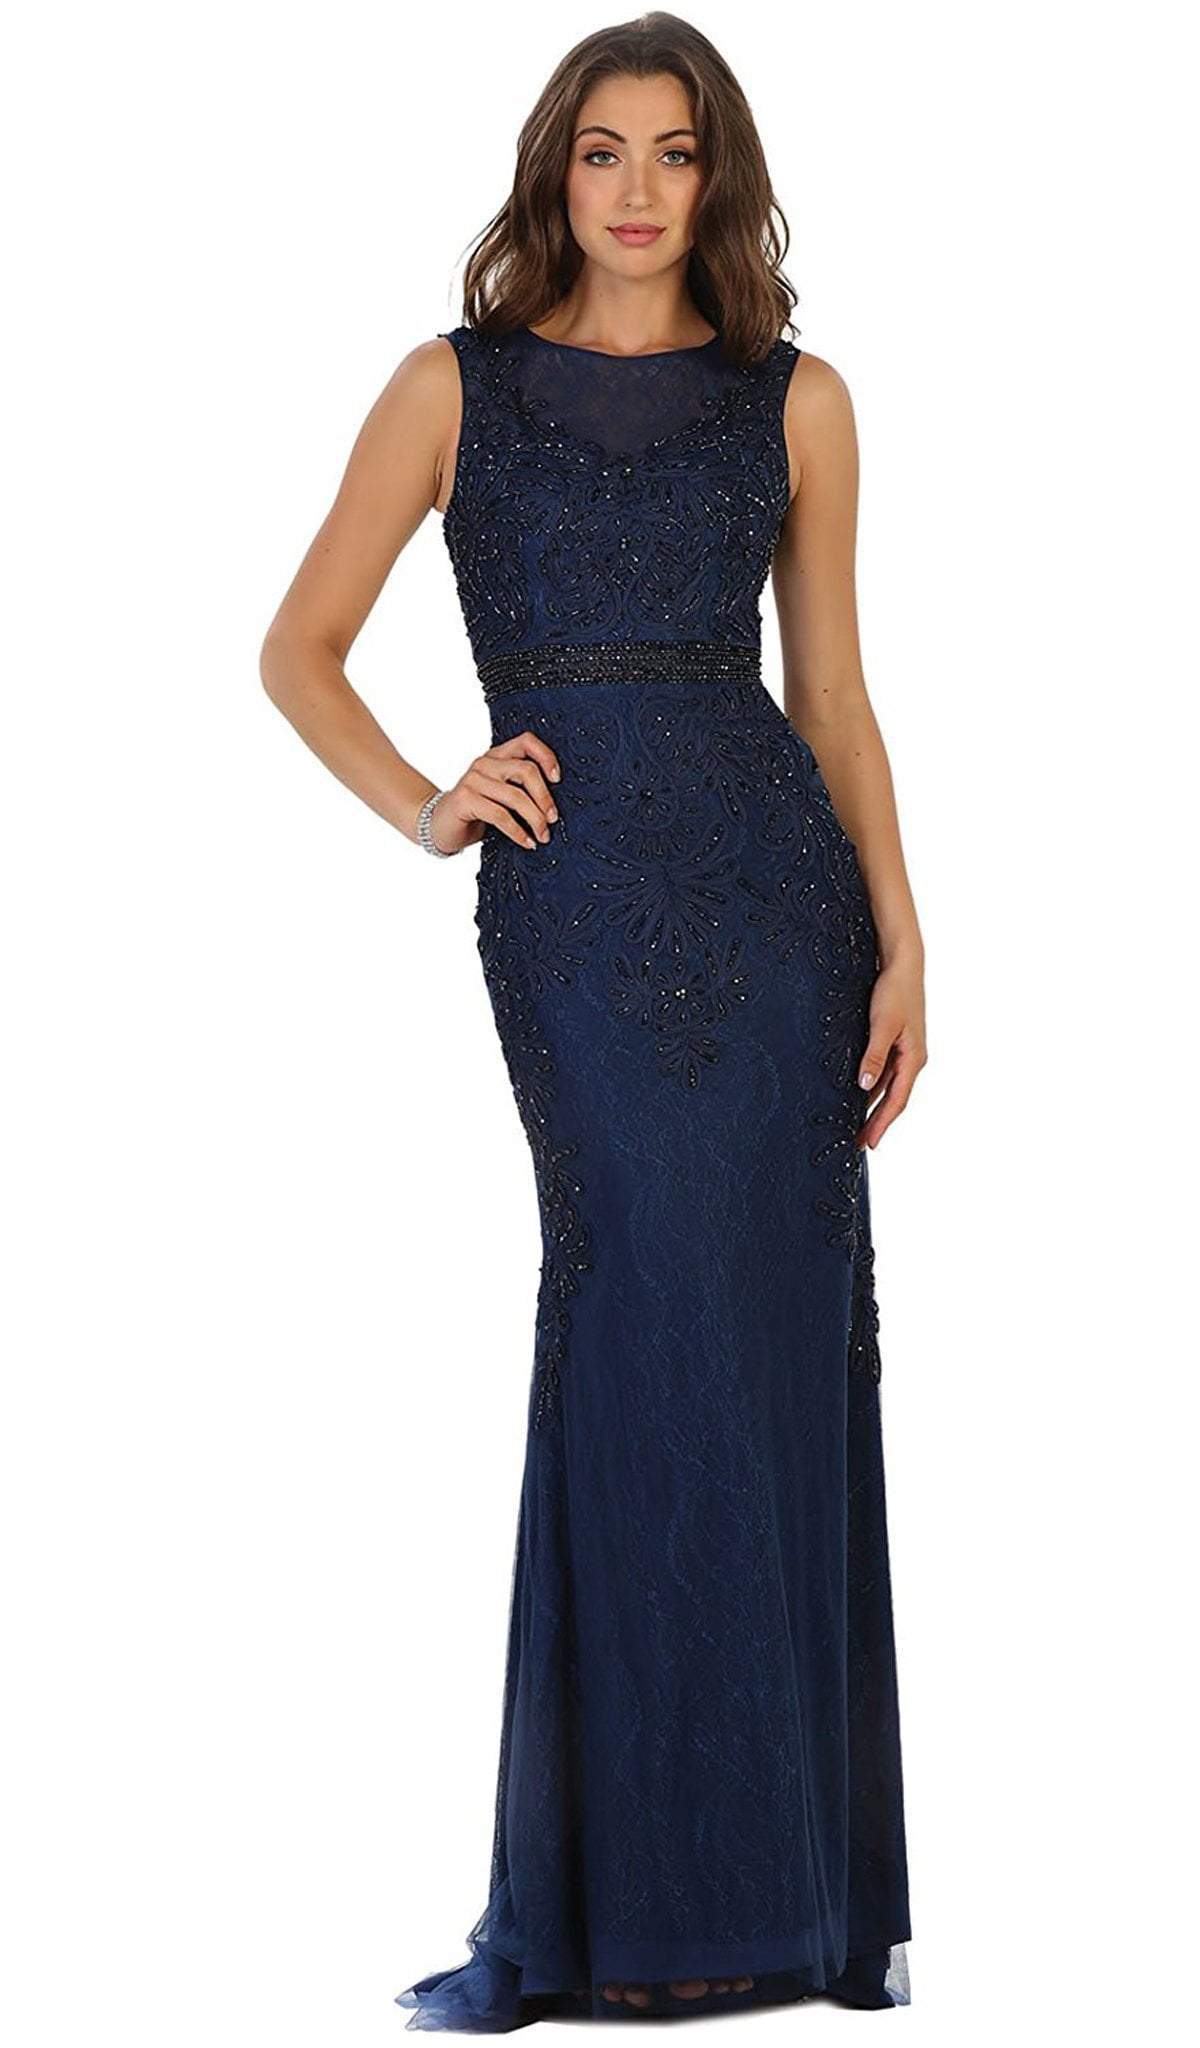 May Queen - Bedazzled Sheer Bateau Sheath Evening Dress
